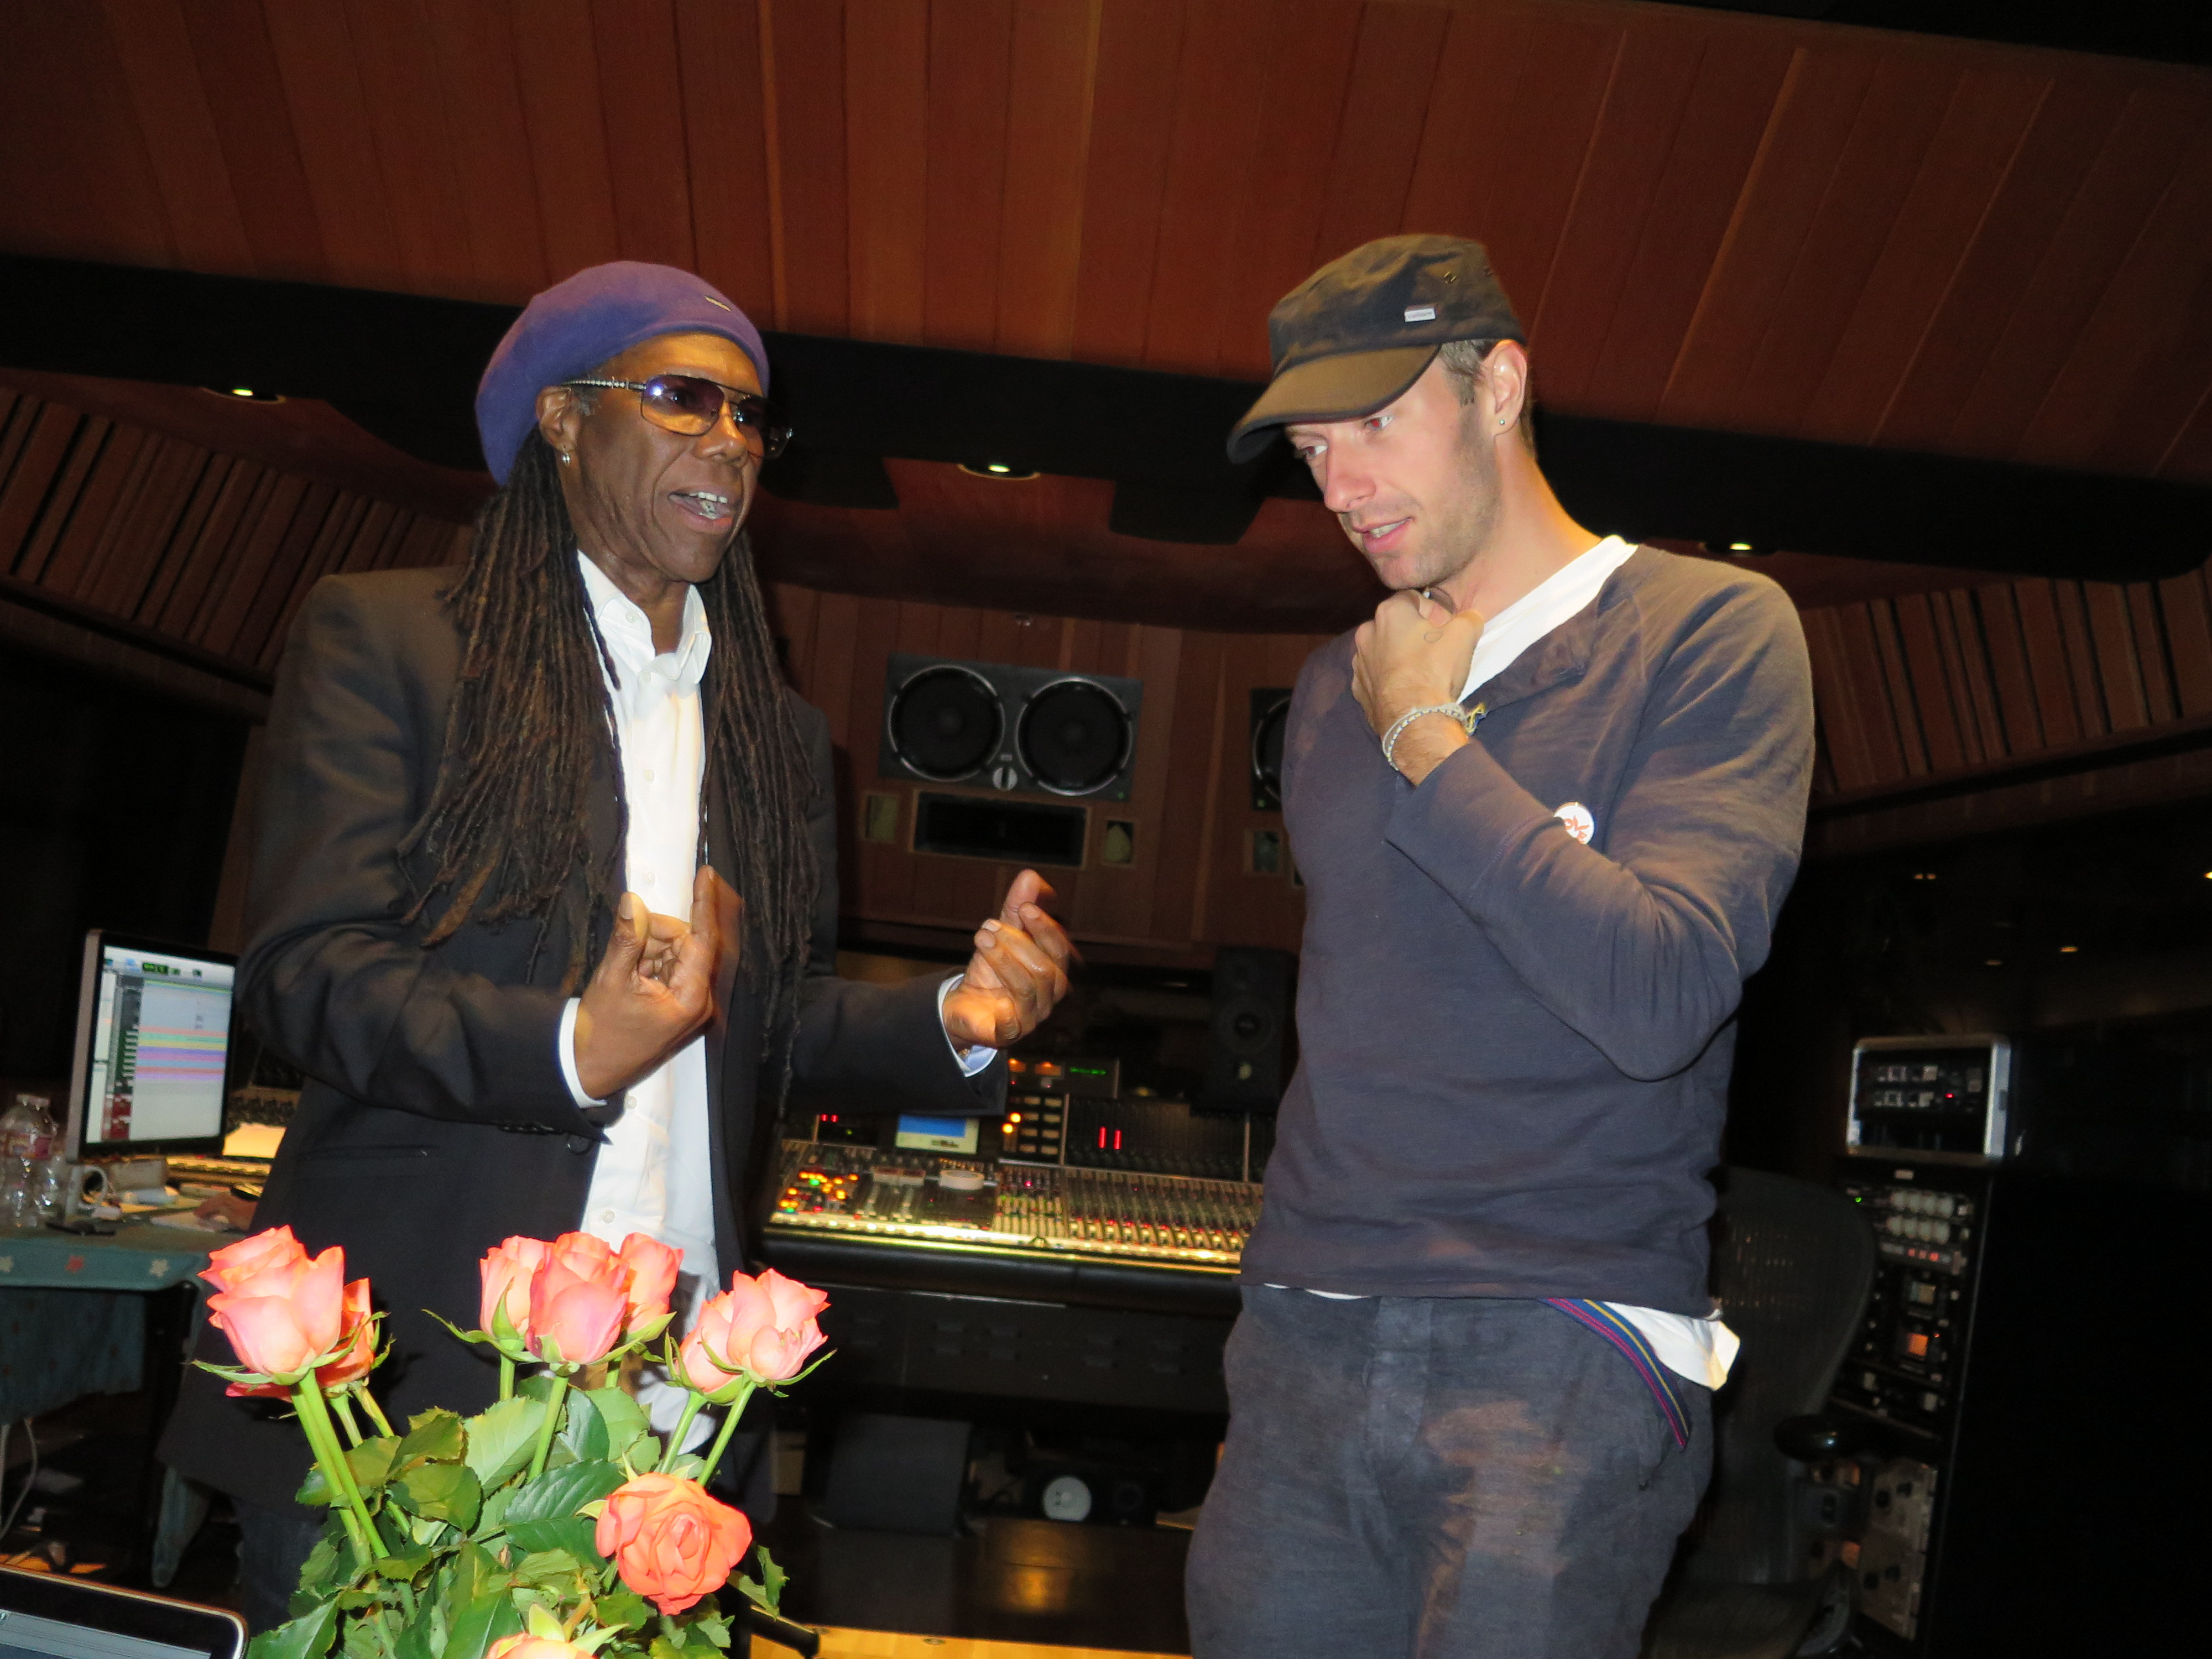 Nile Rodgers + Chris Martin (The Backpacker Intern)